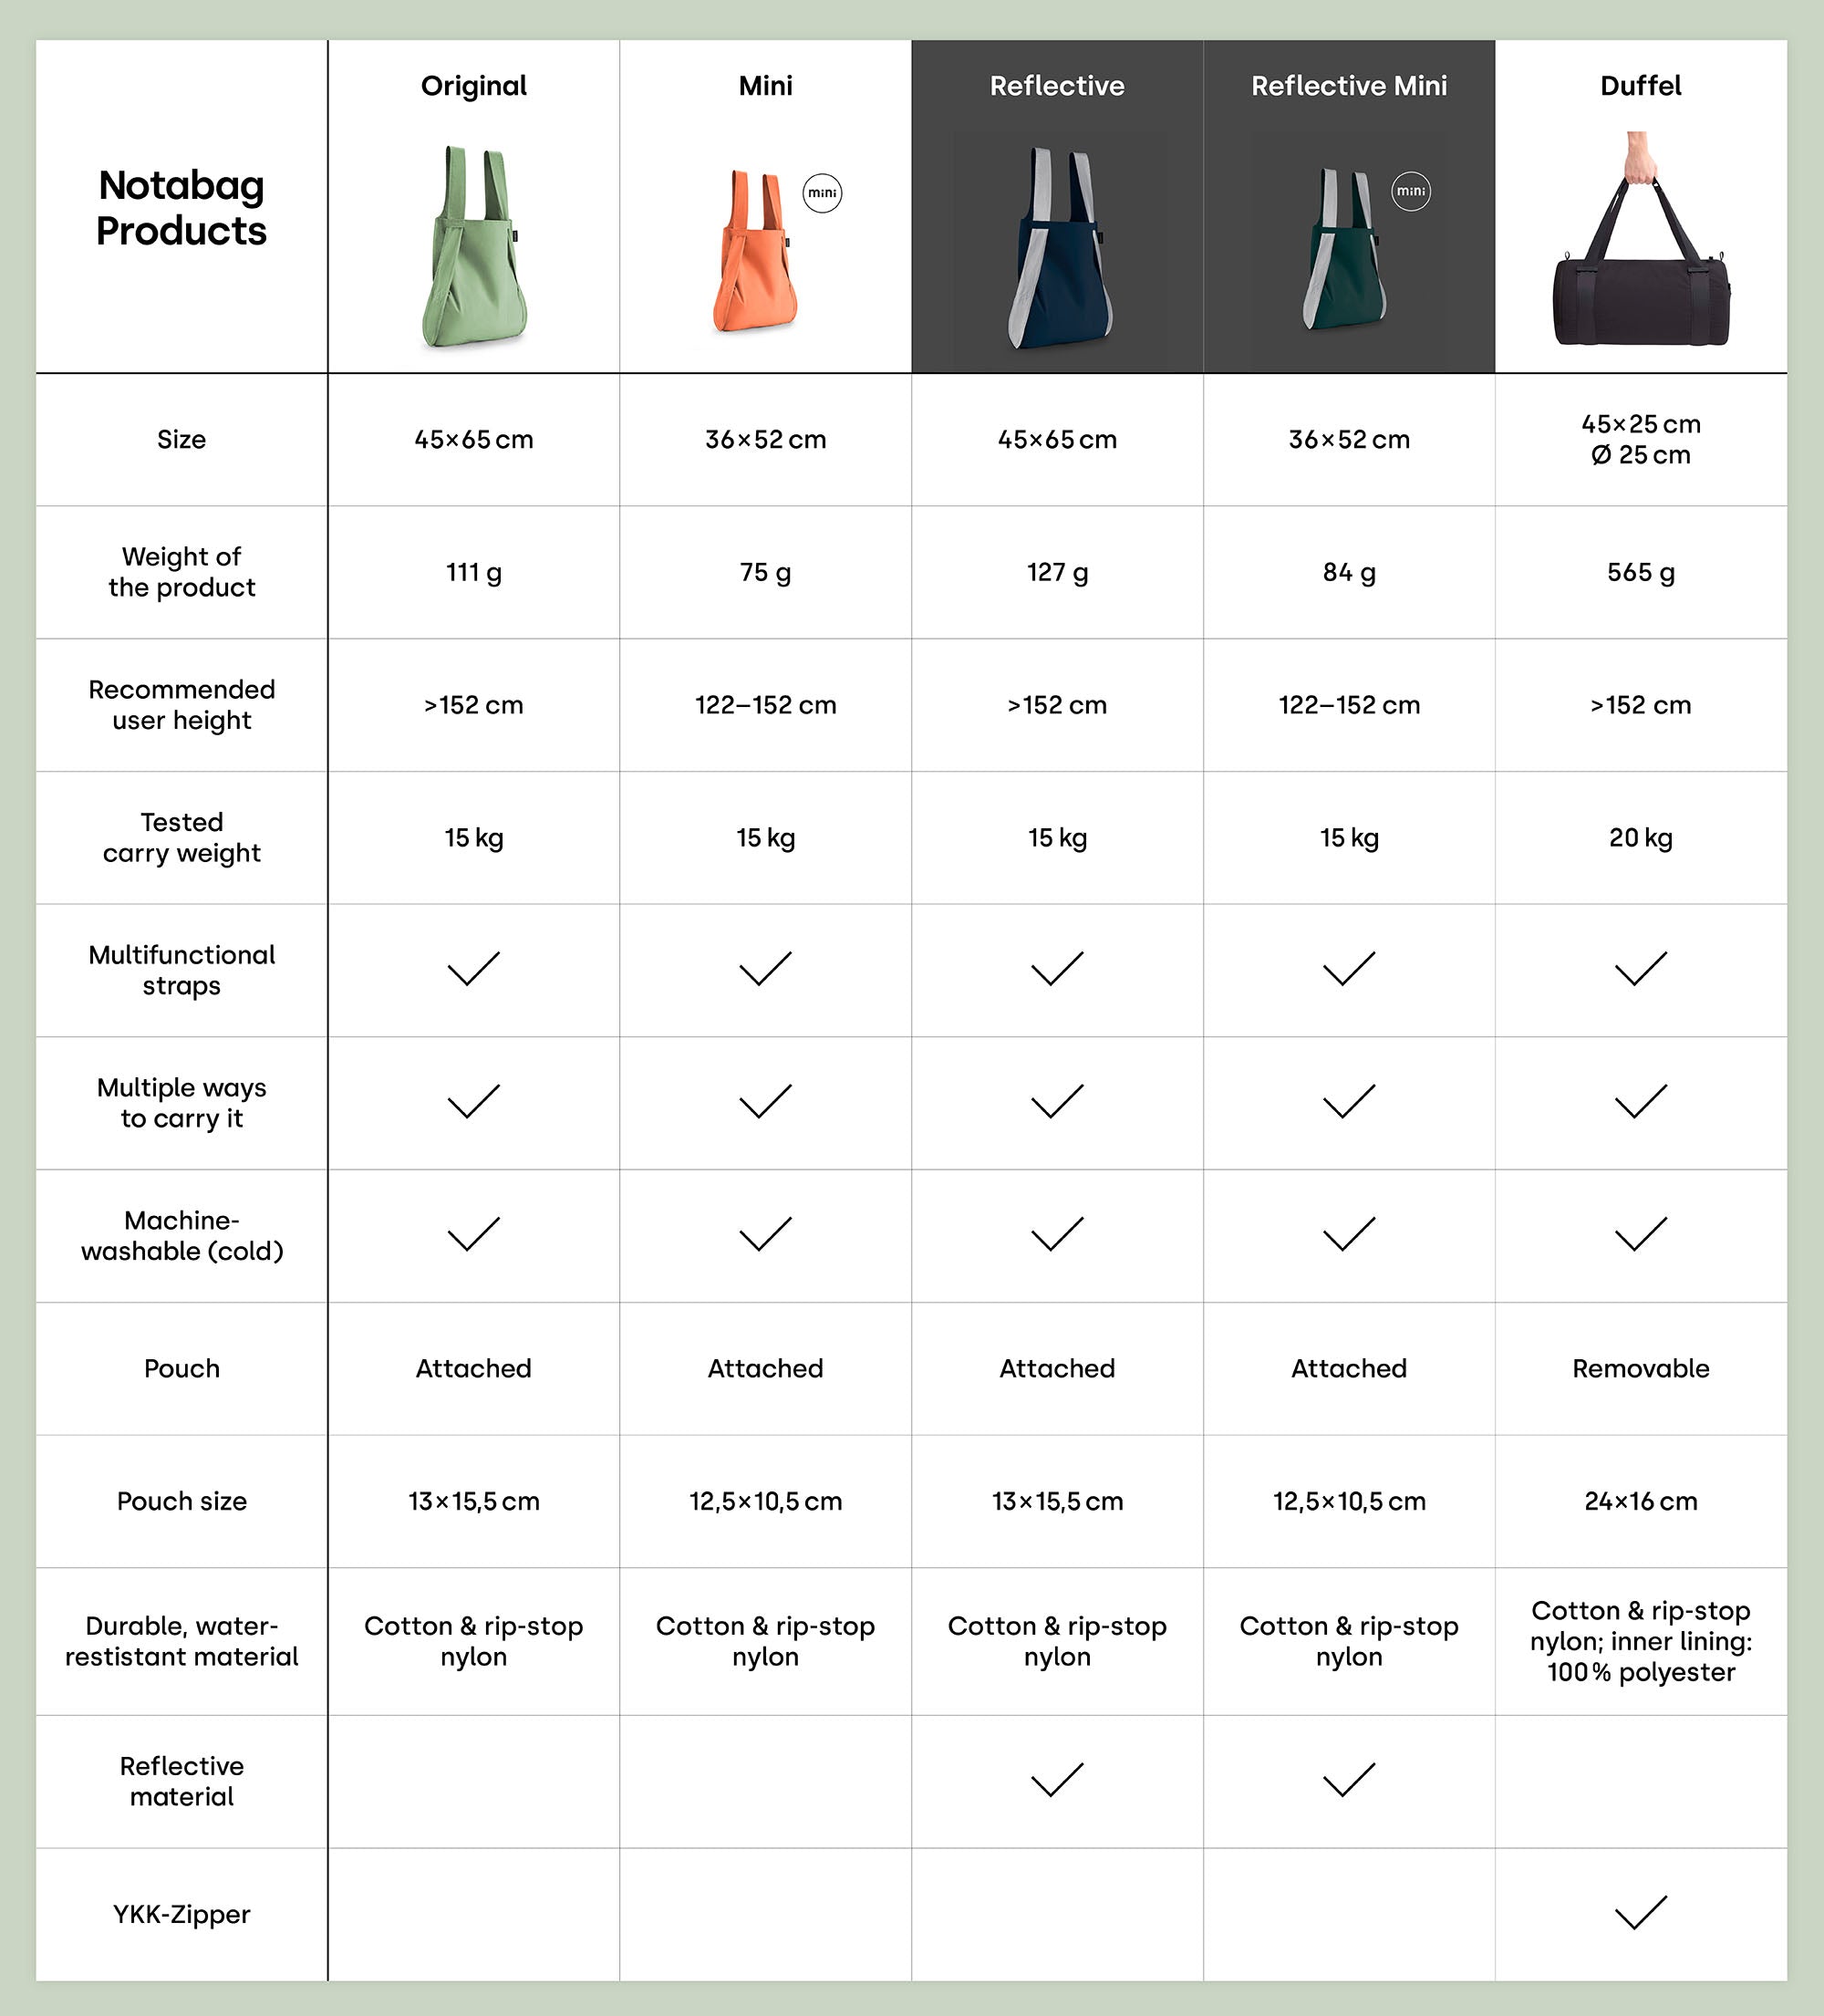 Notabag products overview